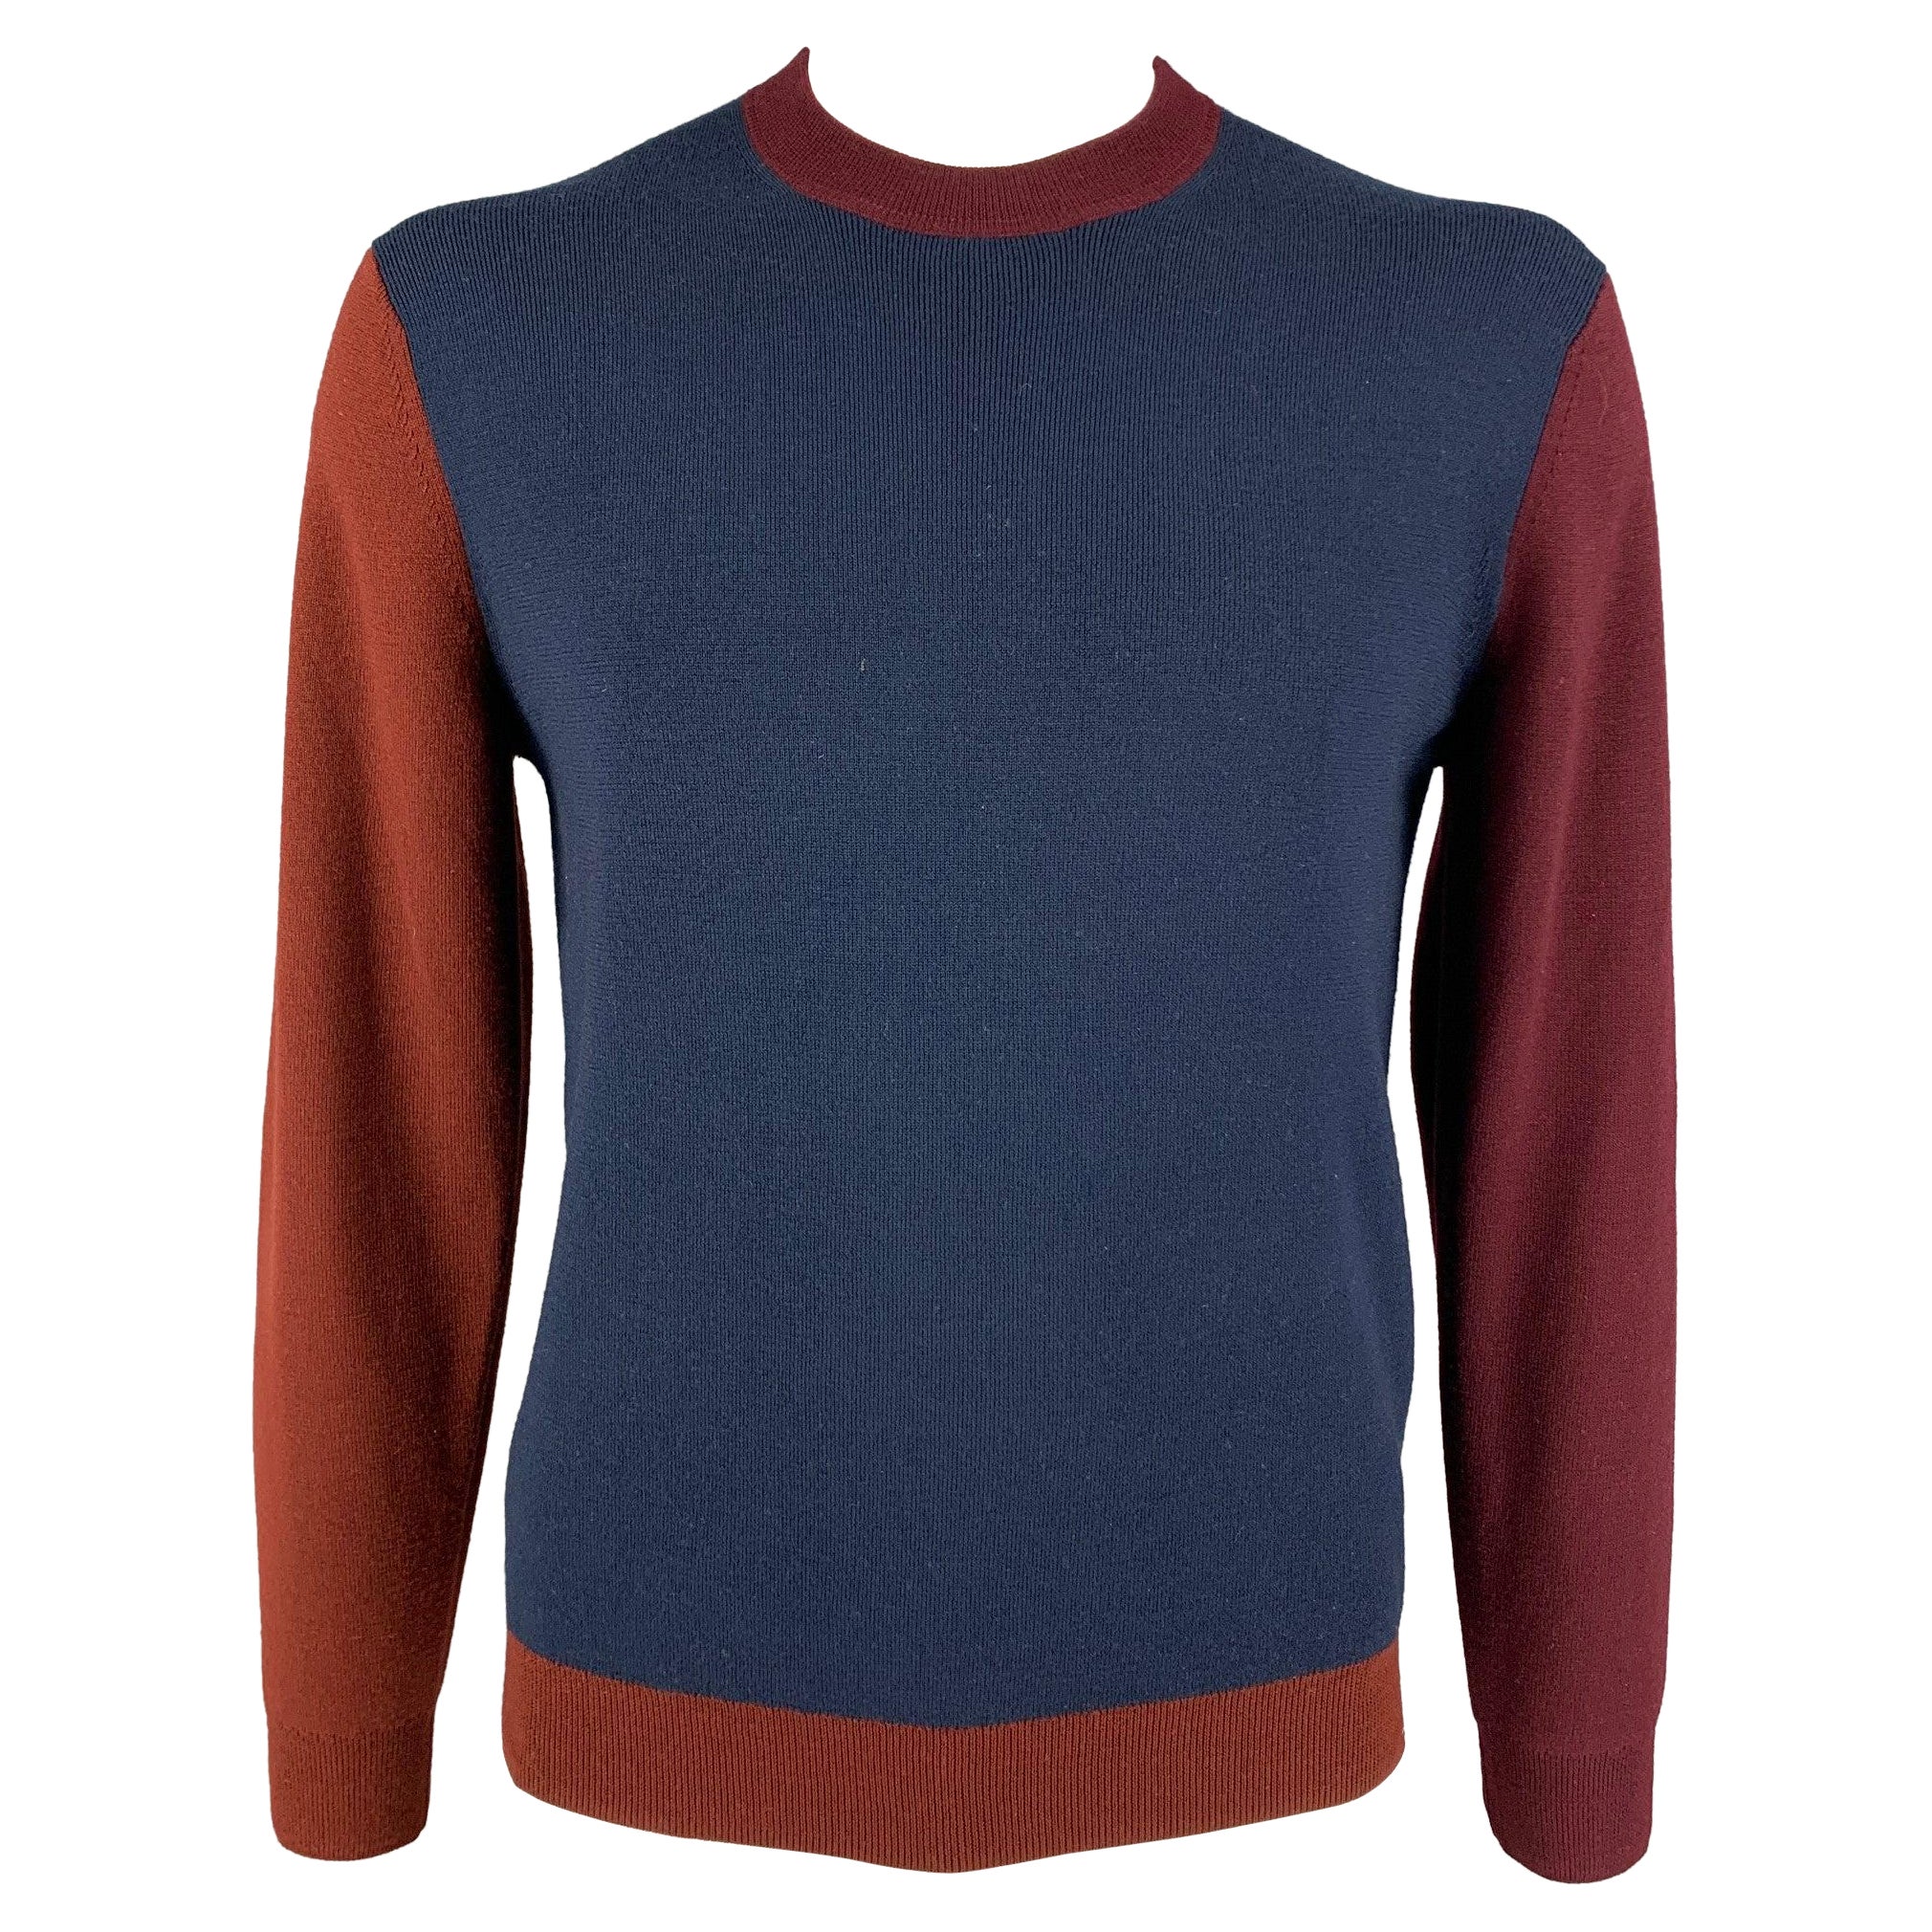 PAUL SMITH Size M Navy Burgundy Color Block Merino Wool Crew-Neck Sweater For Sale